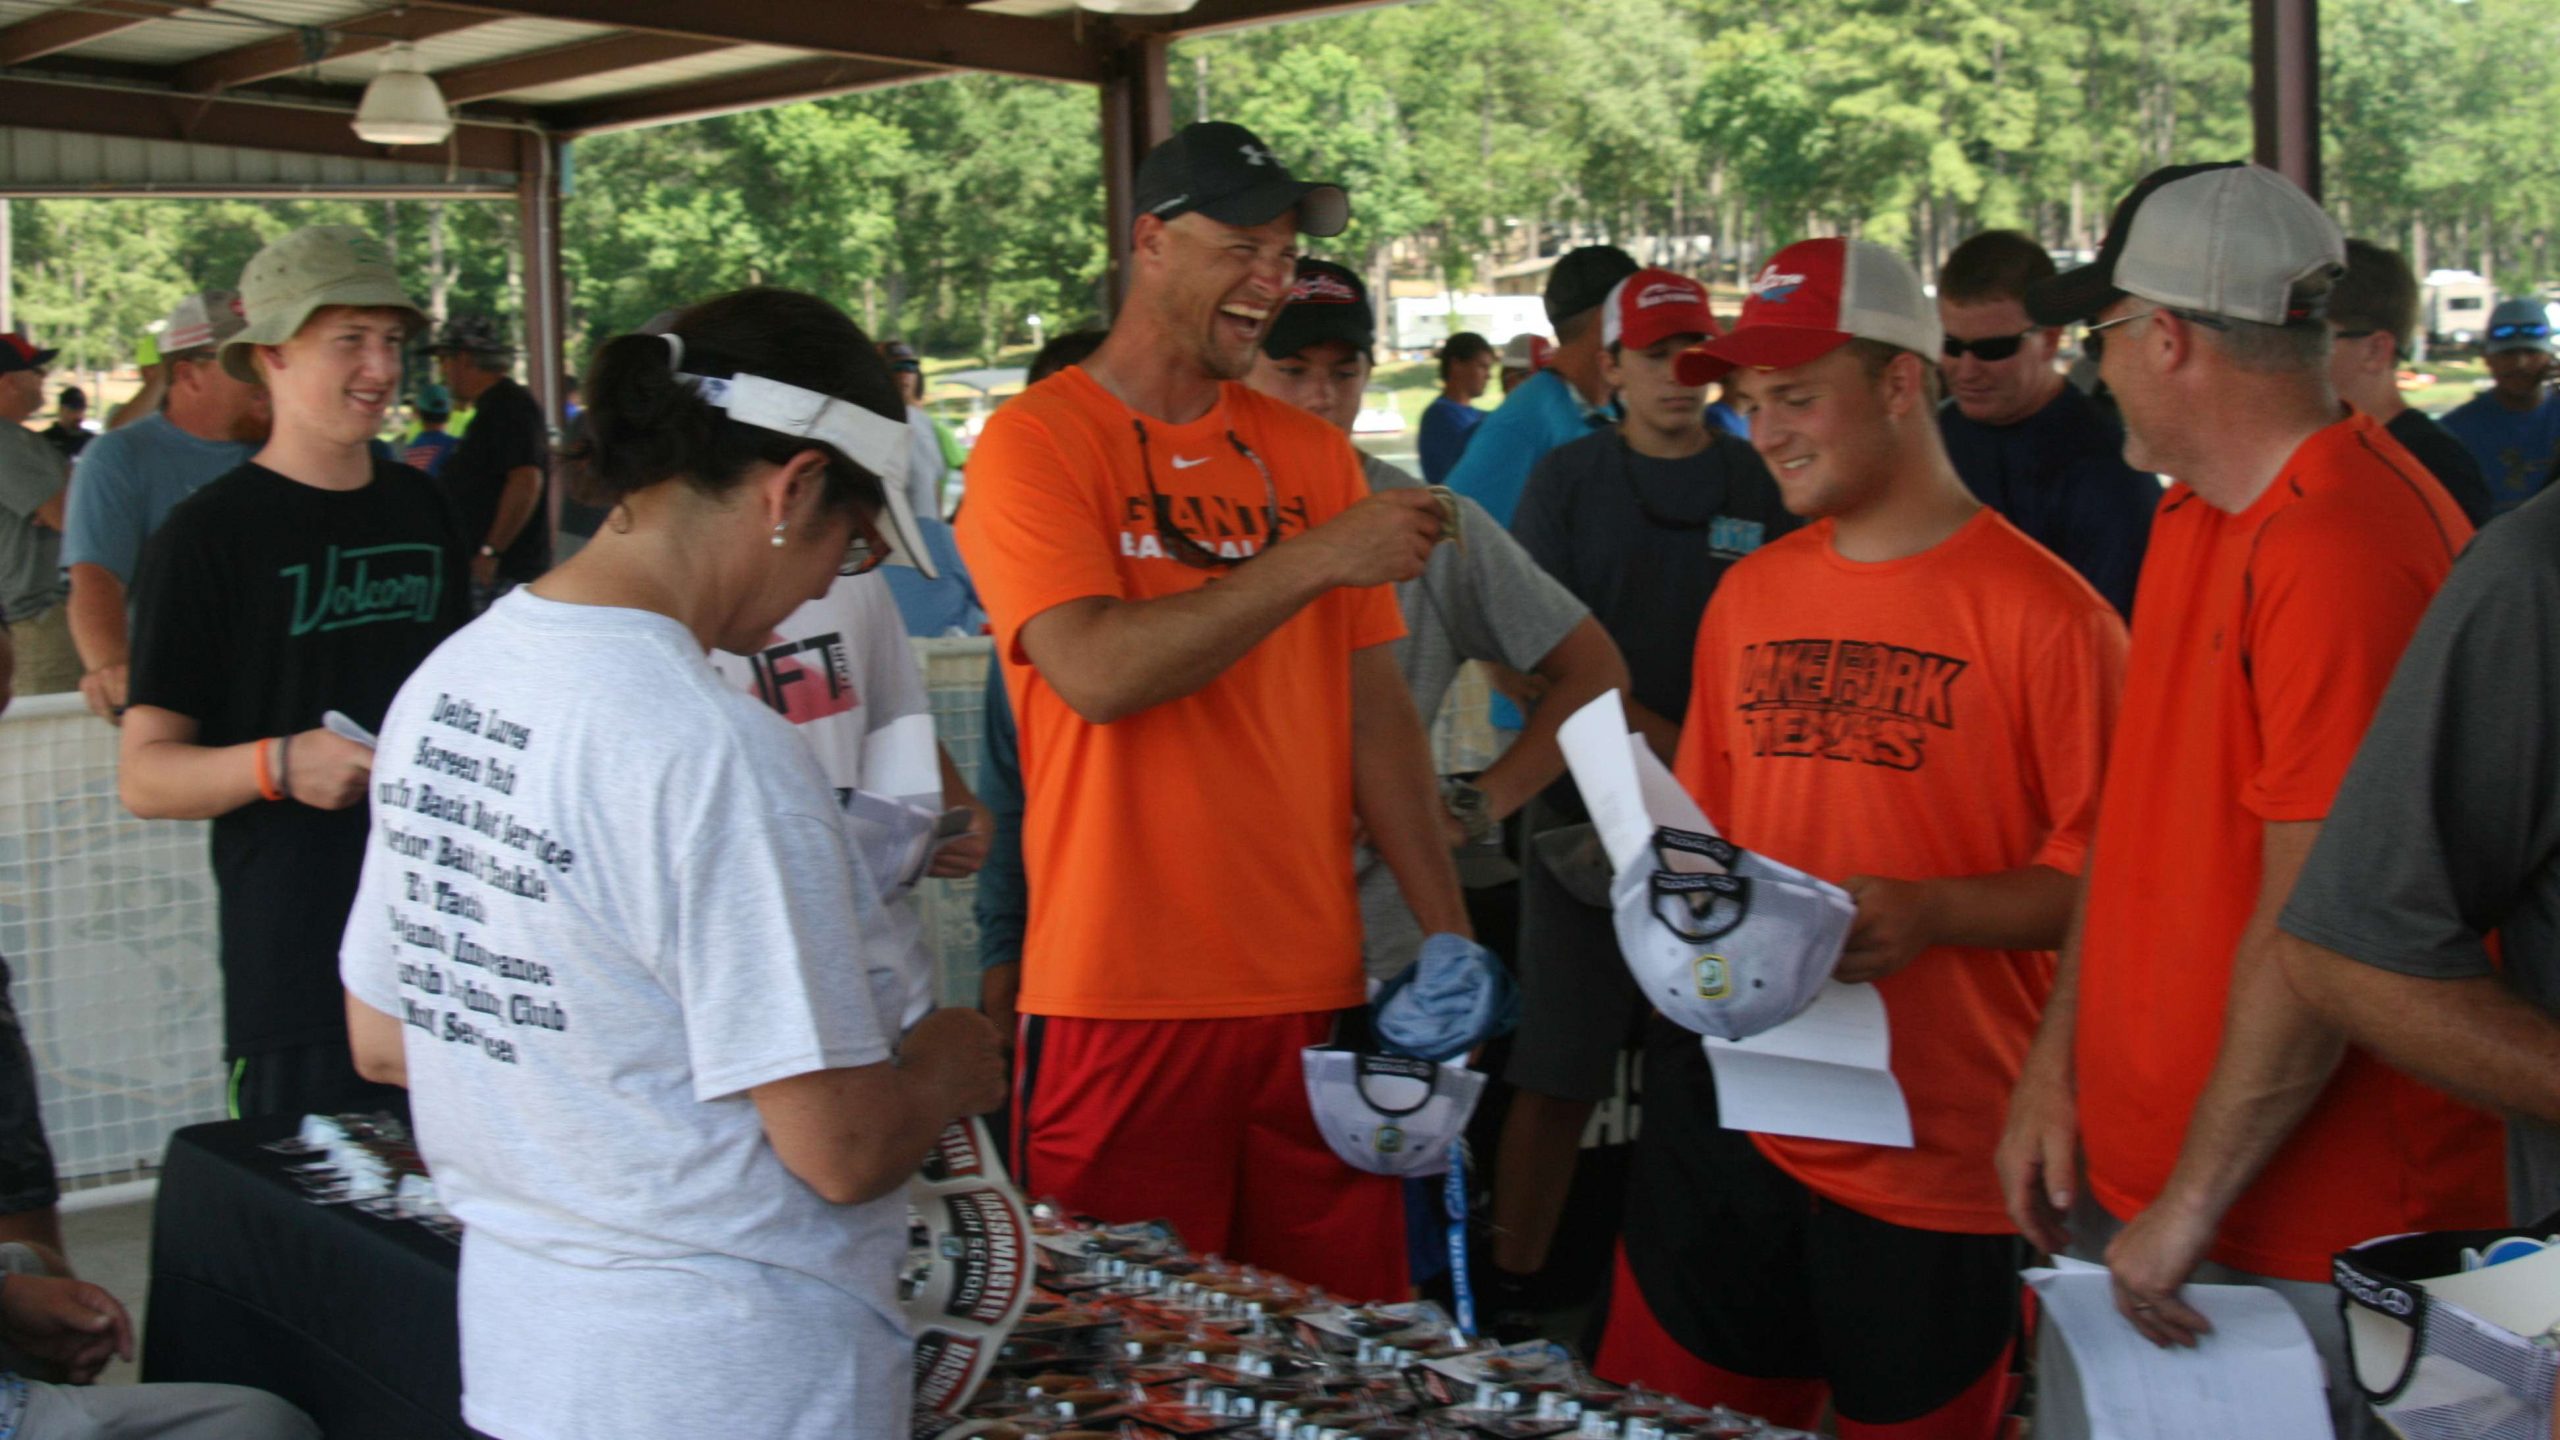 High school anglers are tickled by the chance to grab a lure from this table.